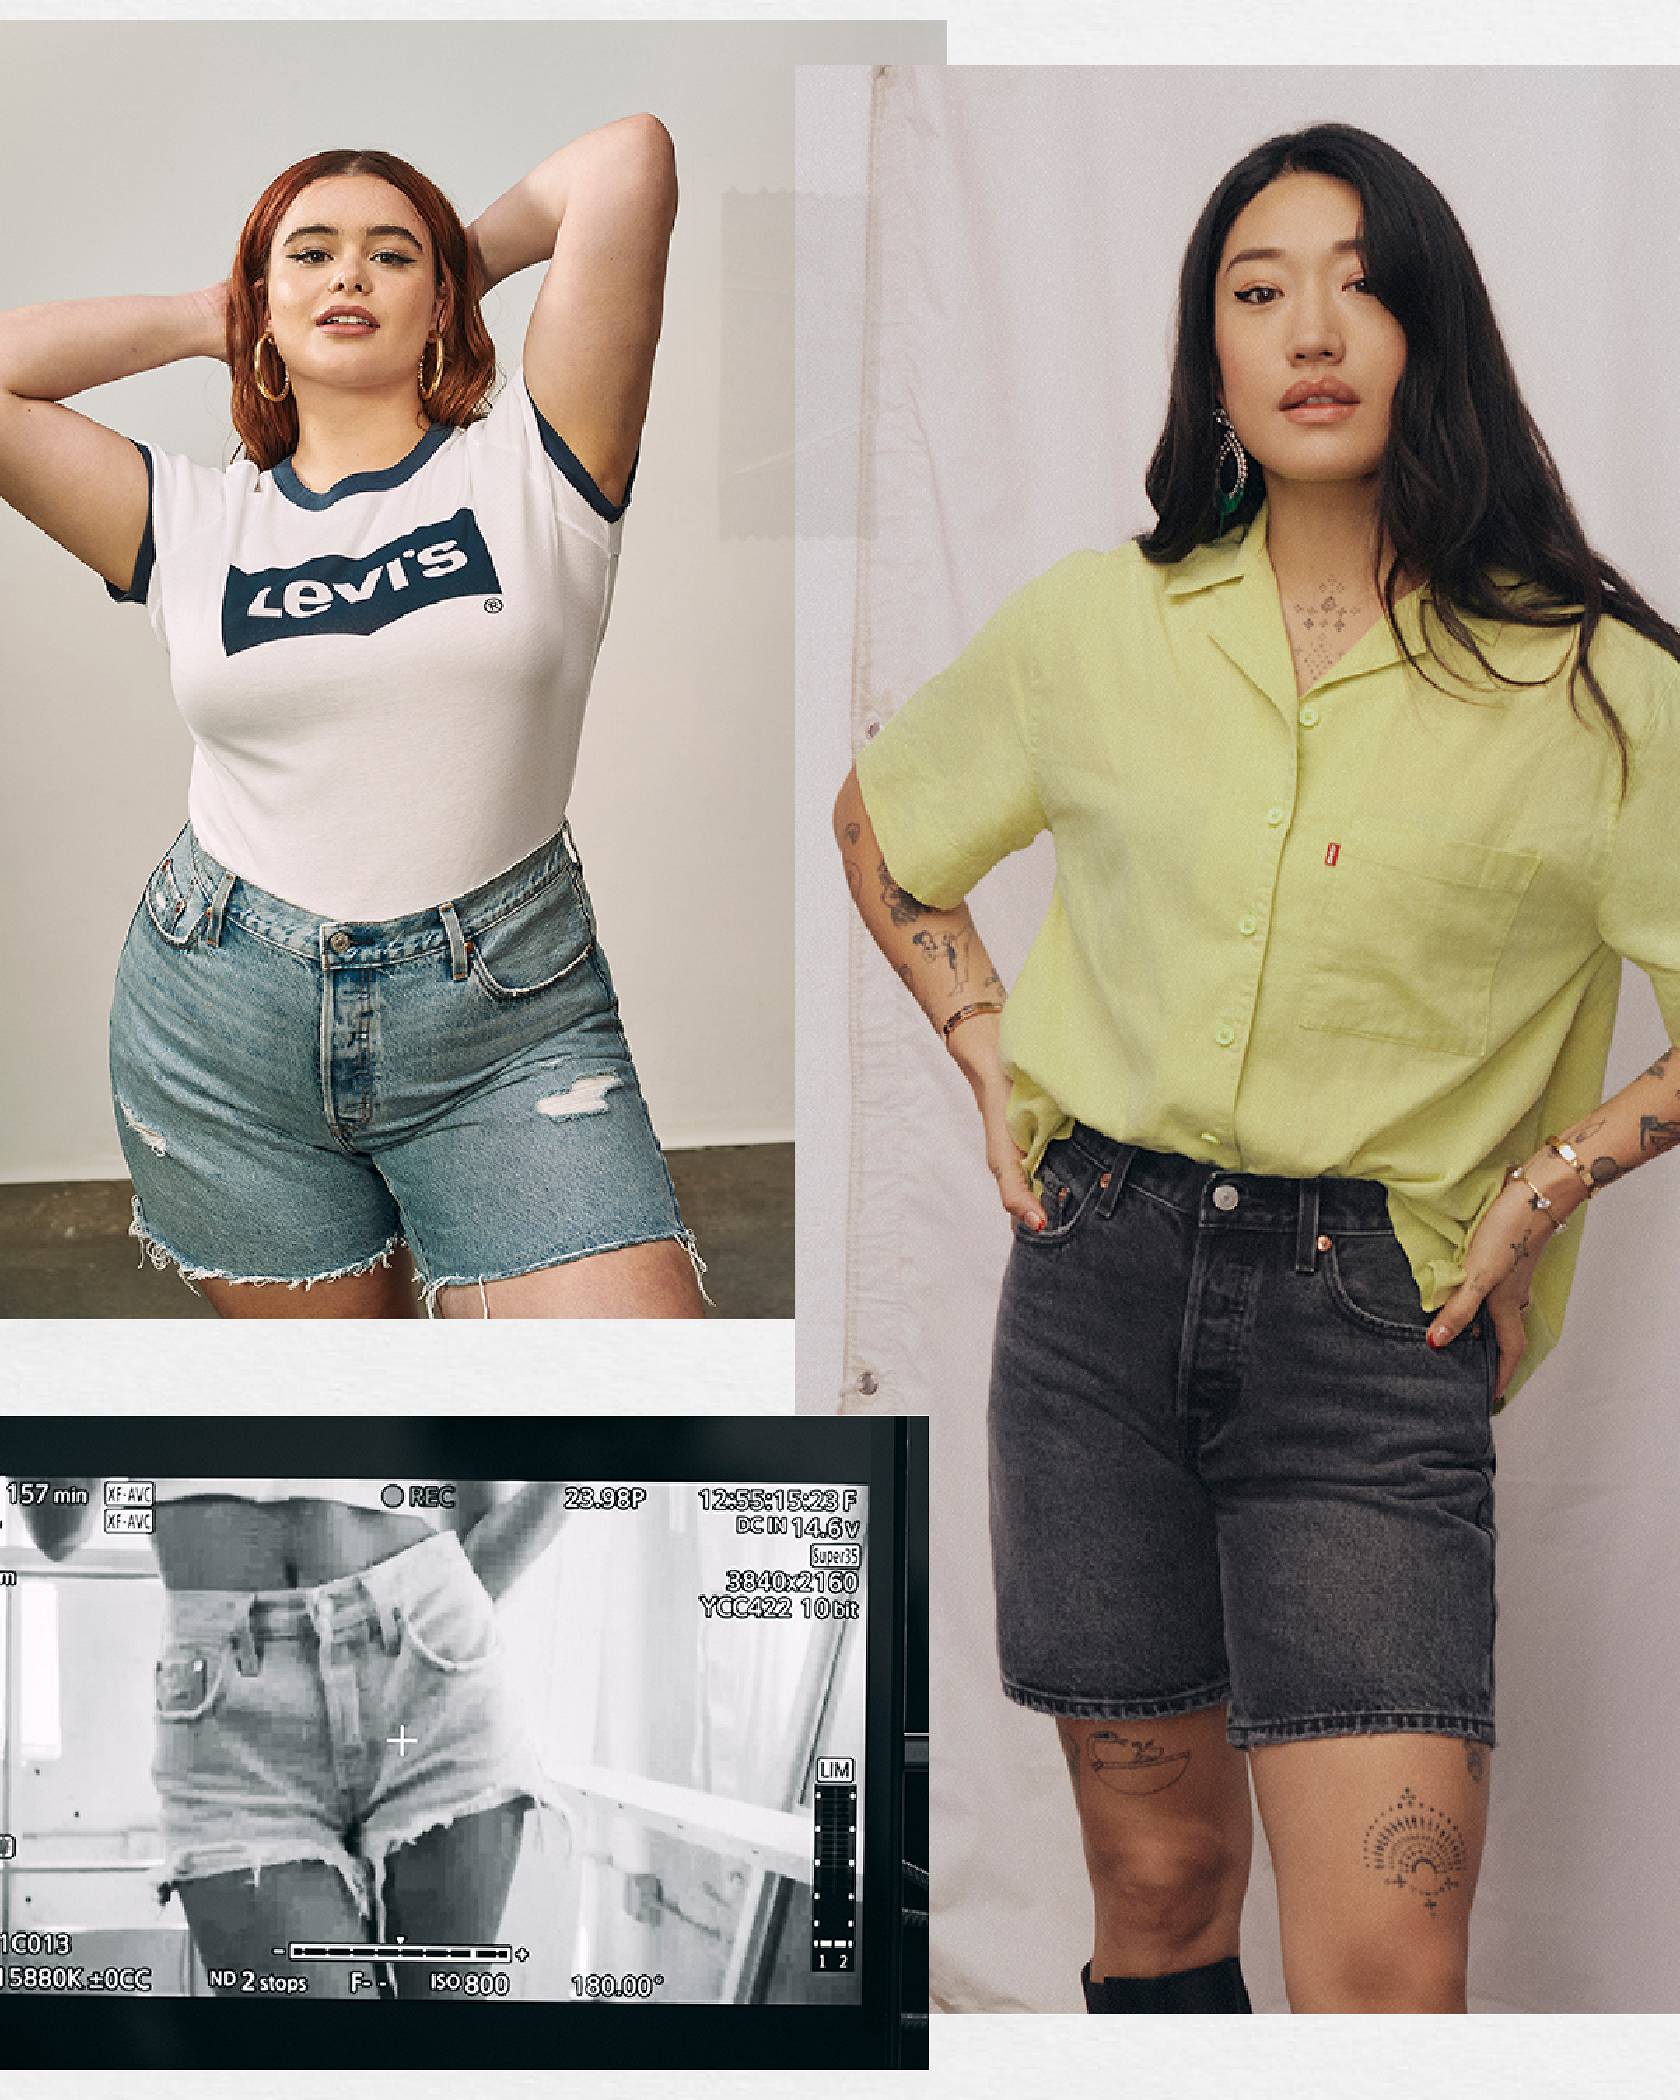 Levis 501® Jean shorts styled on Barbie Ferreira and Peggy Gou